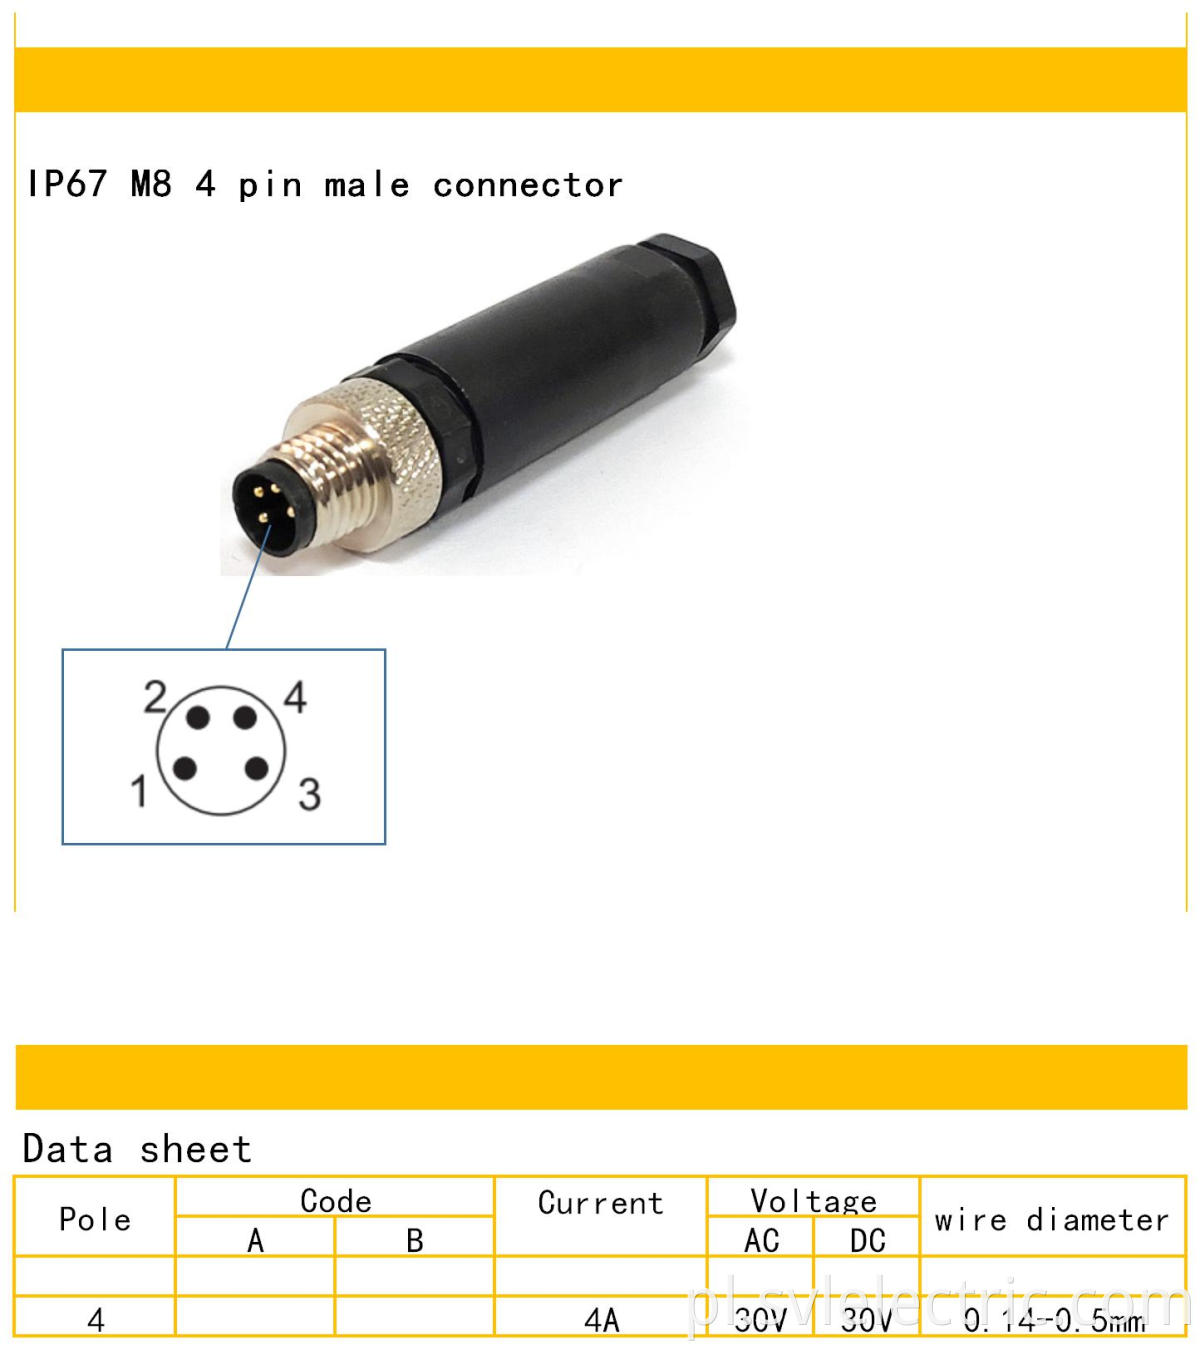 M8 4 pin connector specifications